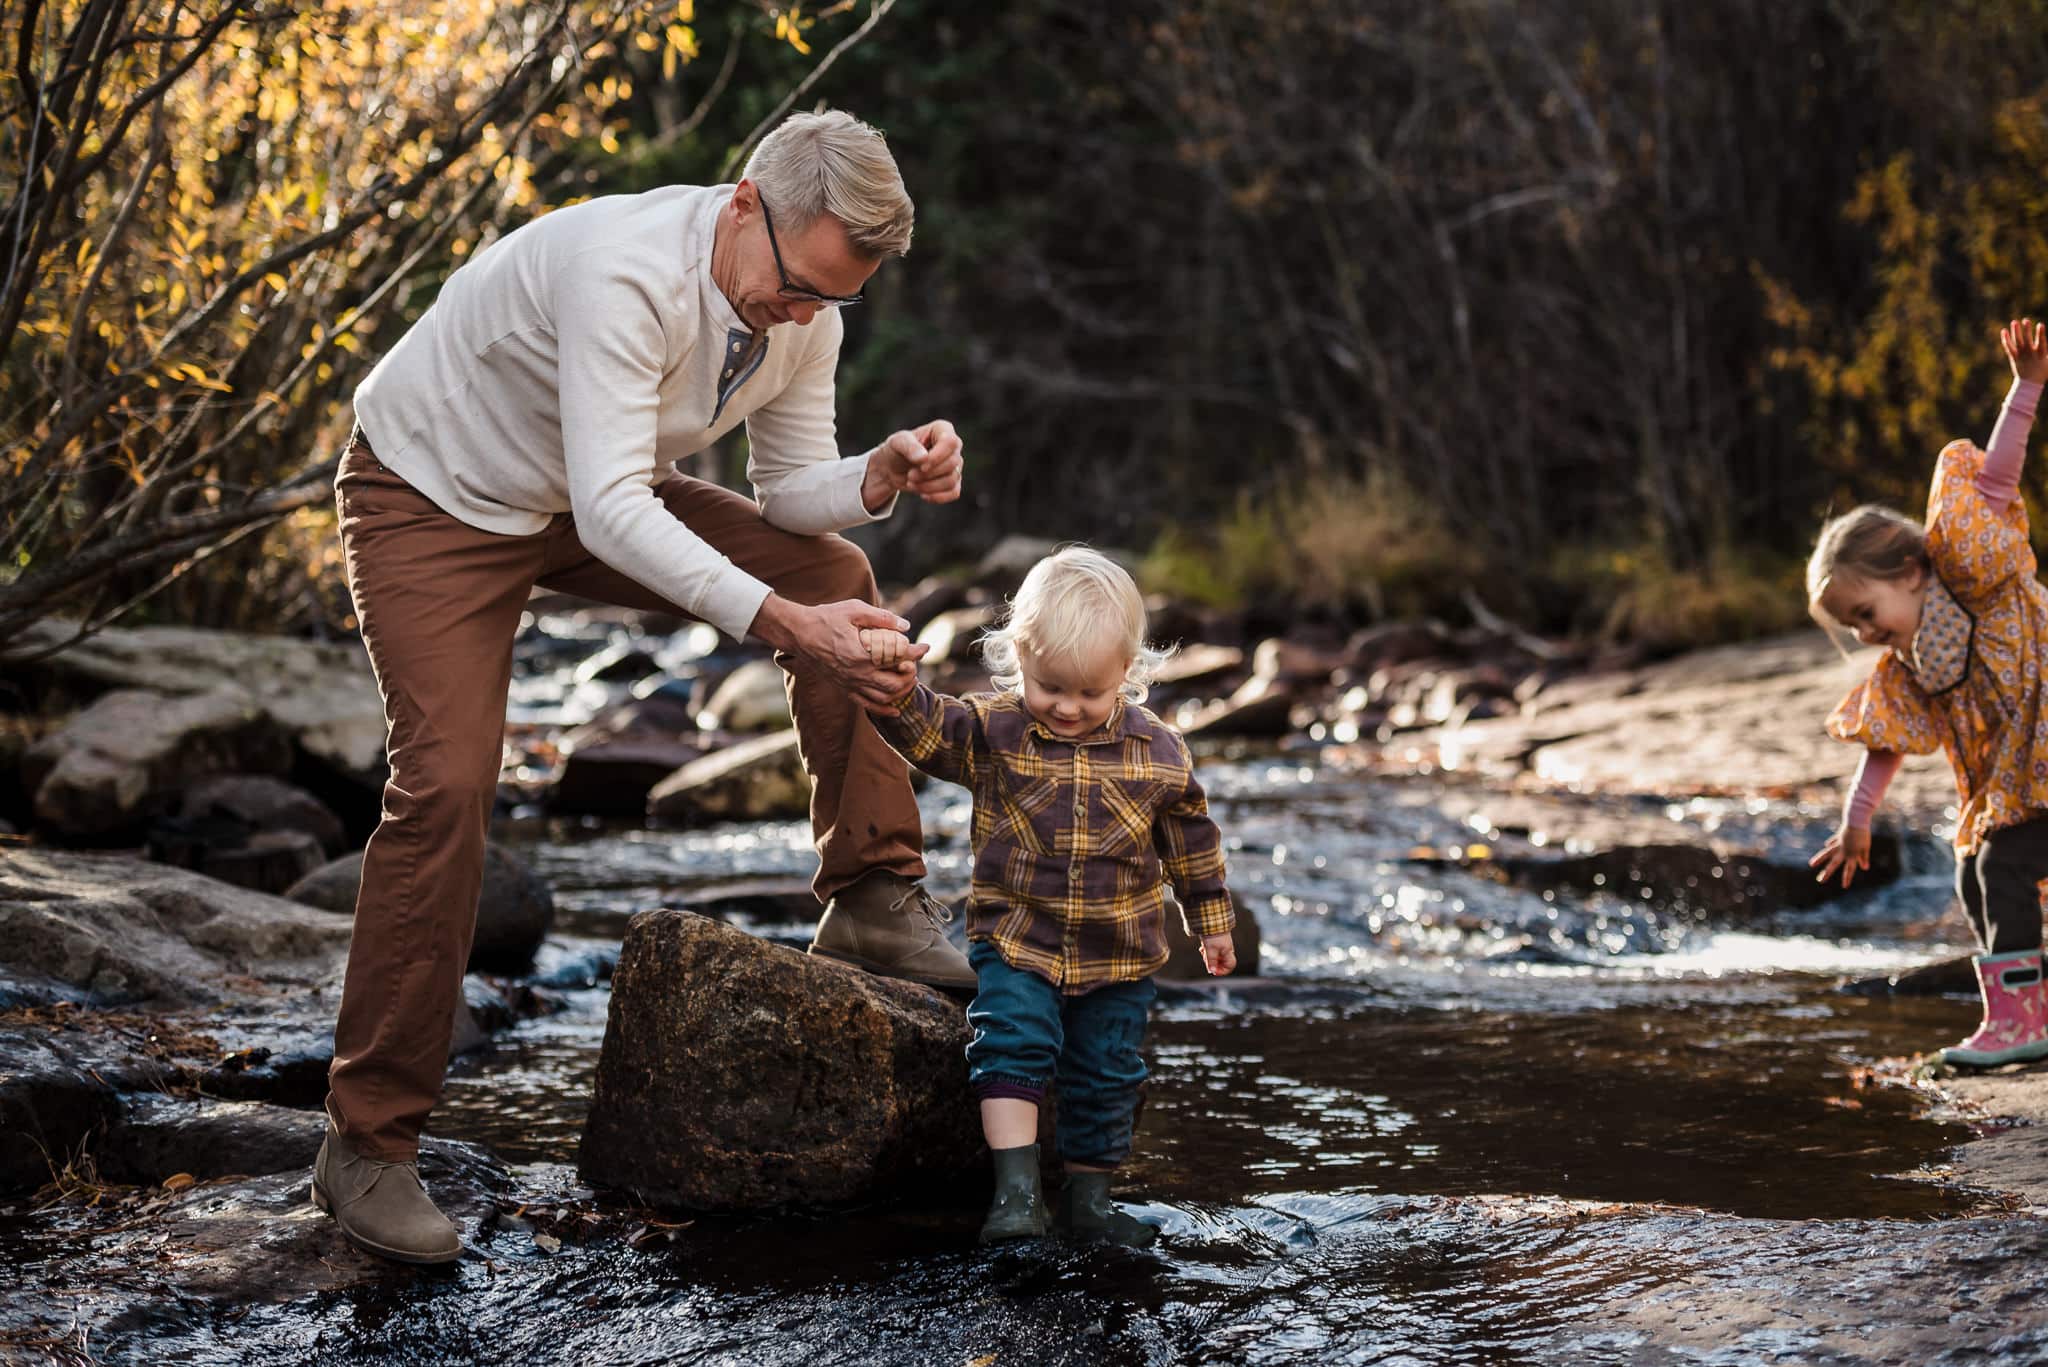 A father helps his sun over the rocks in the creek during an outdoor family portrait session.